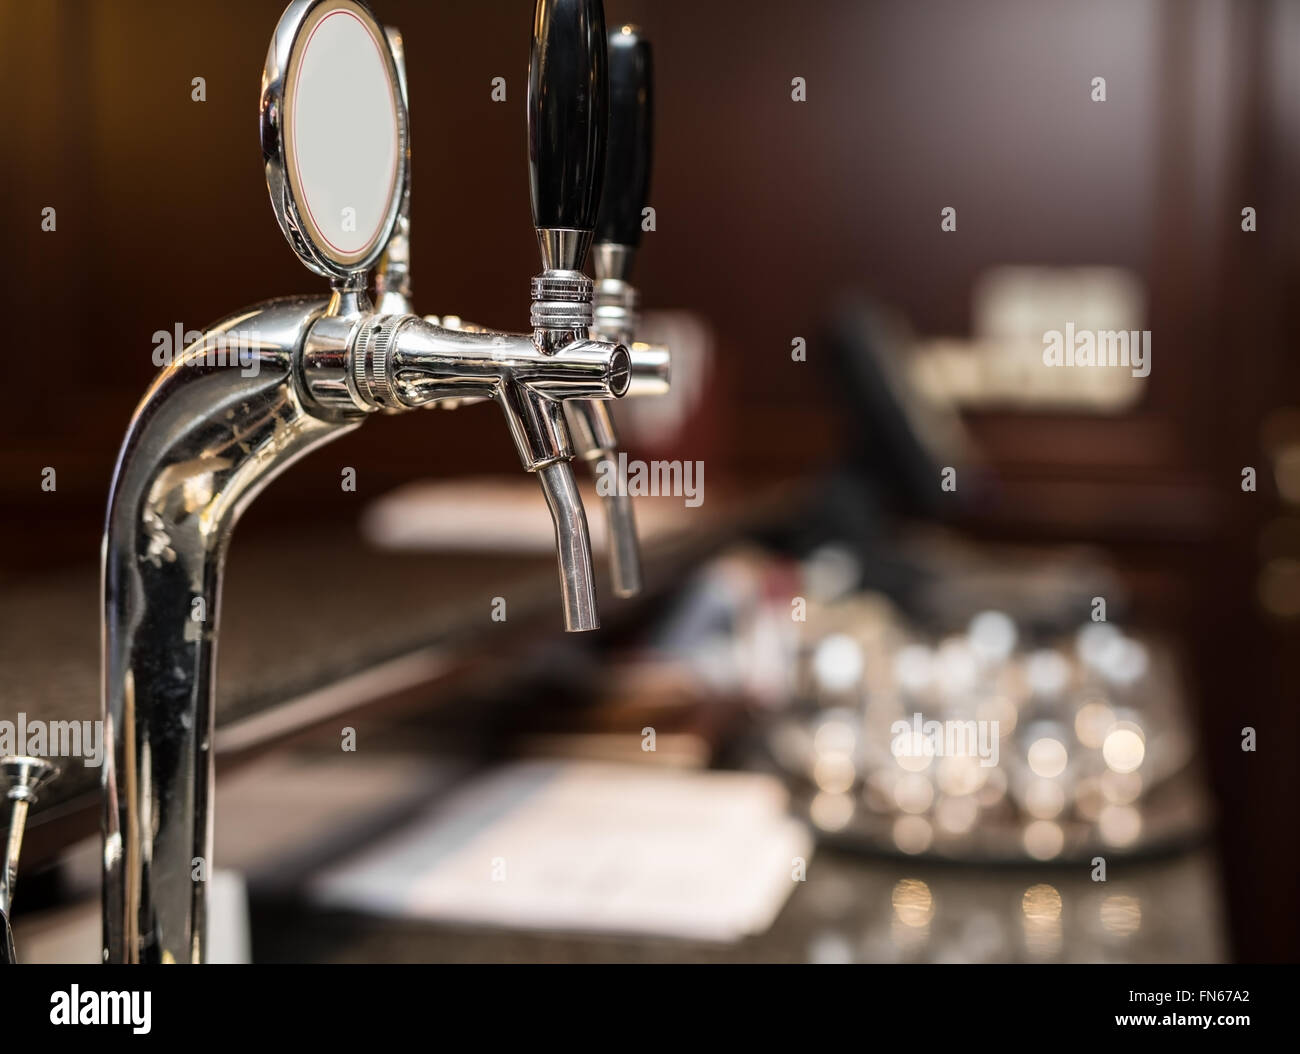 Beer tap. Blurred interior of pub on the background. Stock Photo